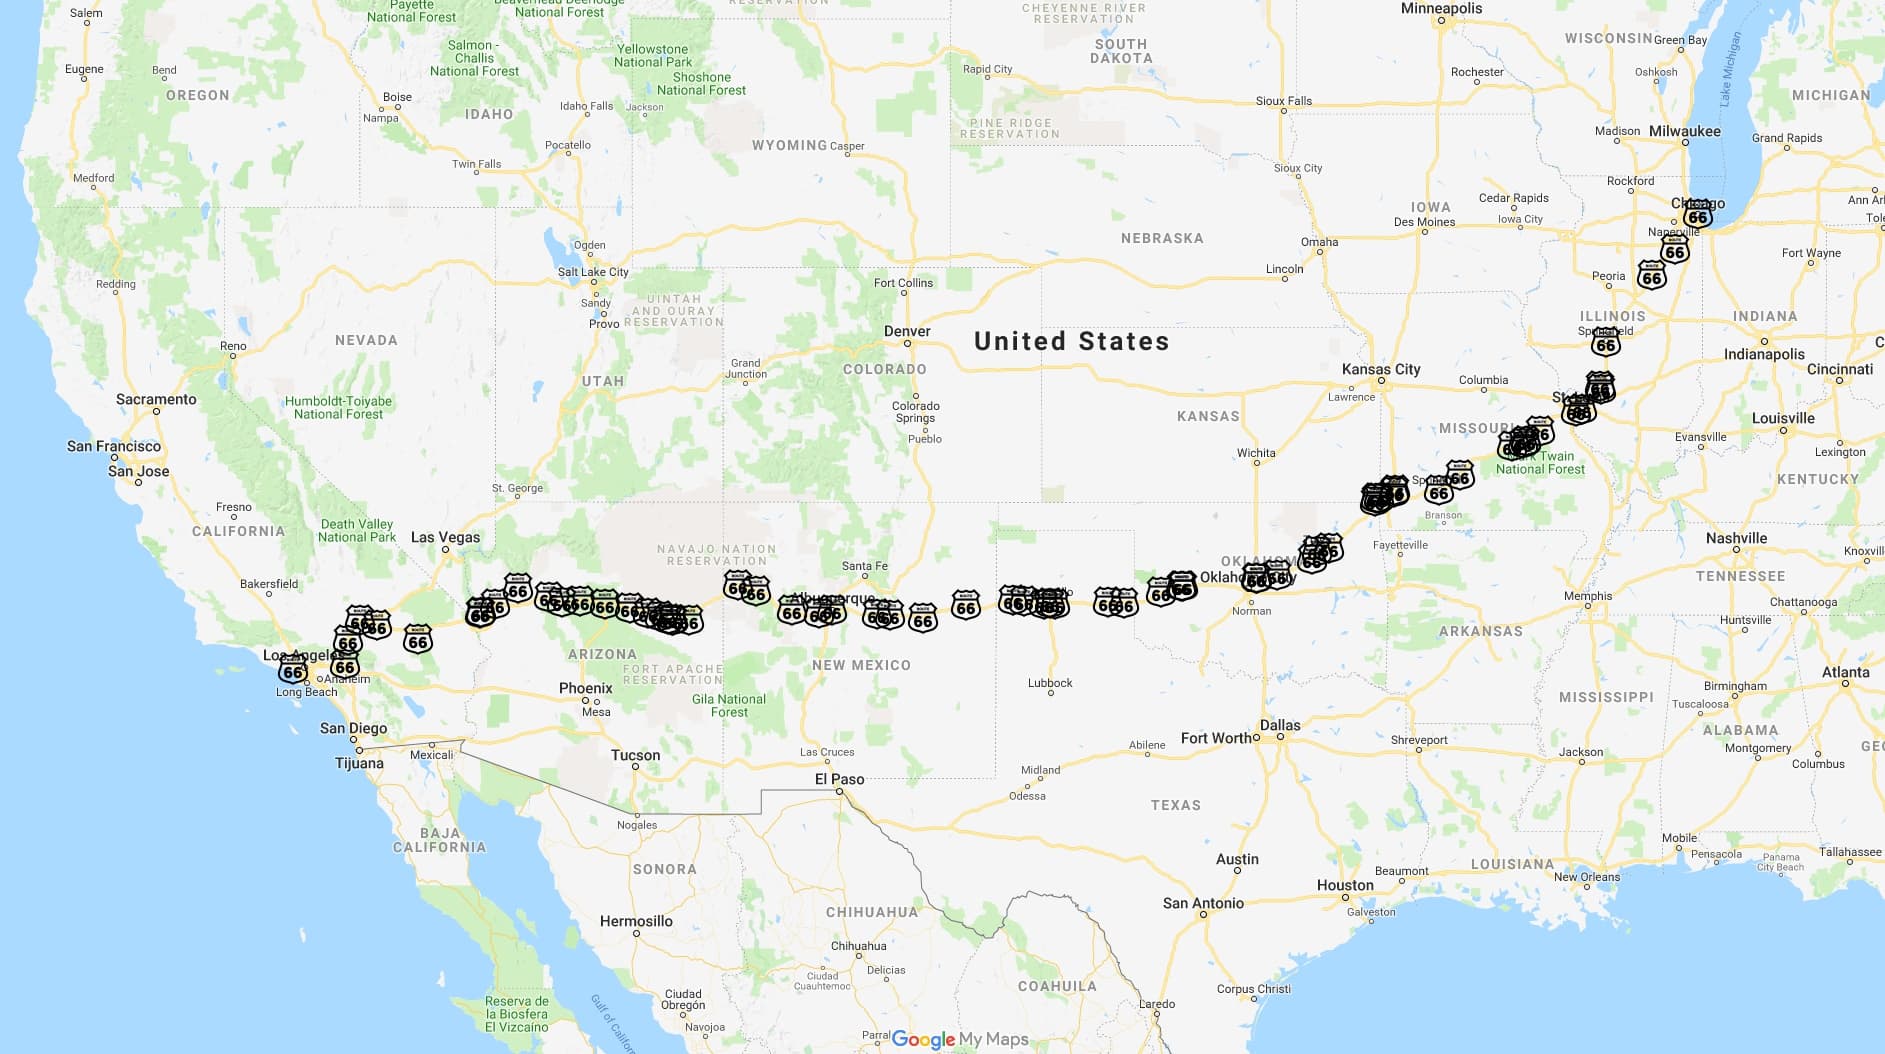 Route 66 itinerary map